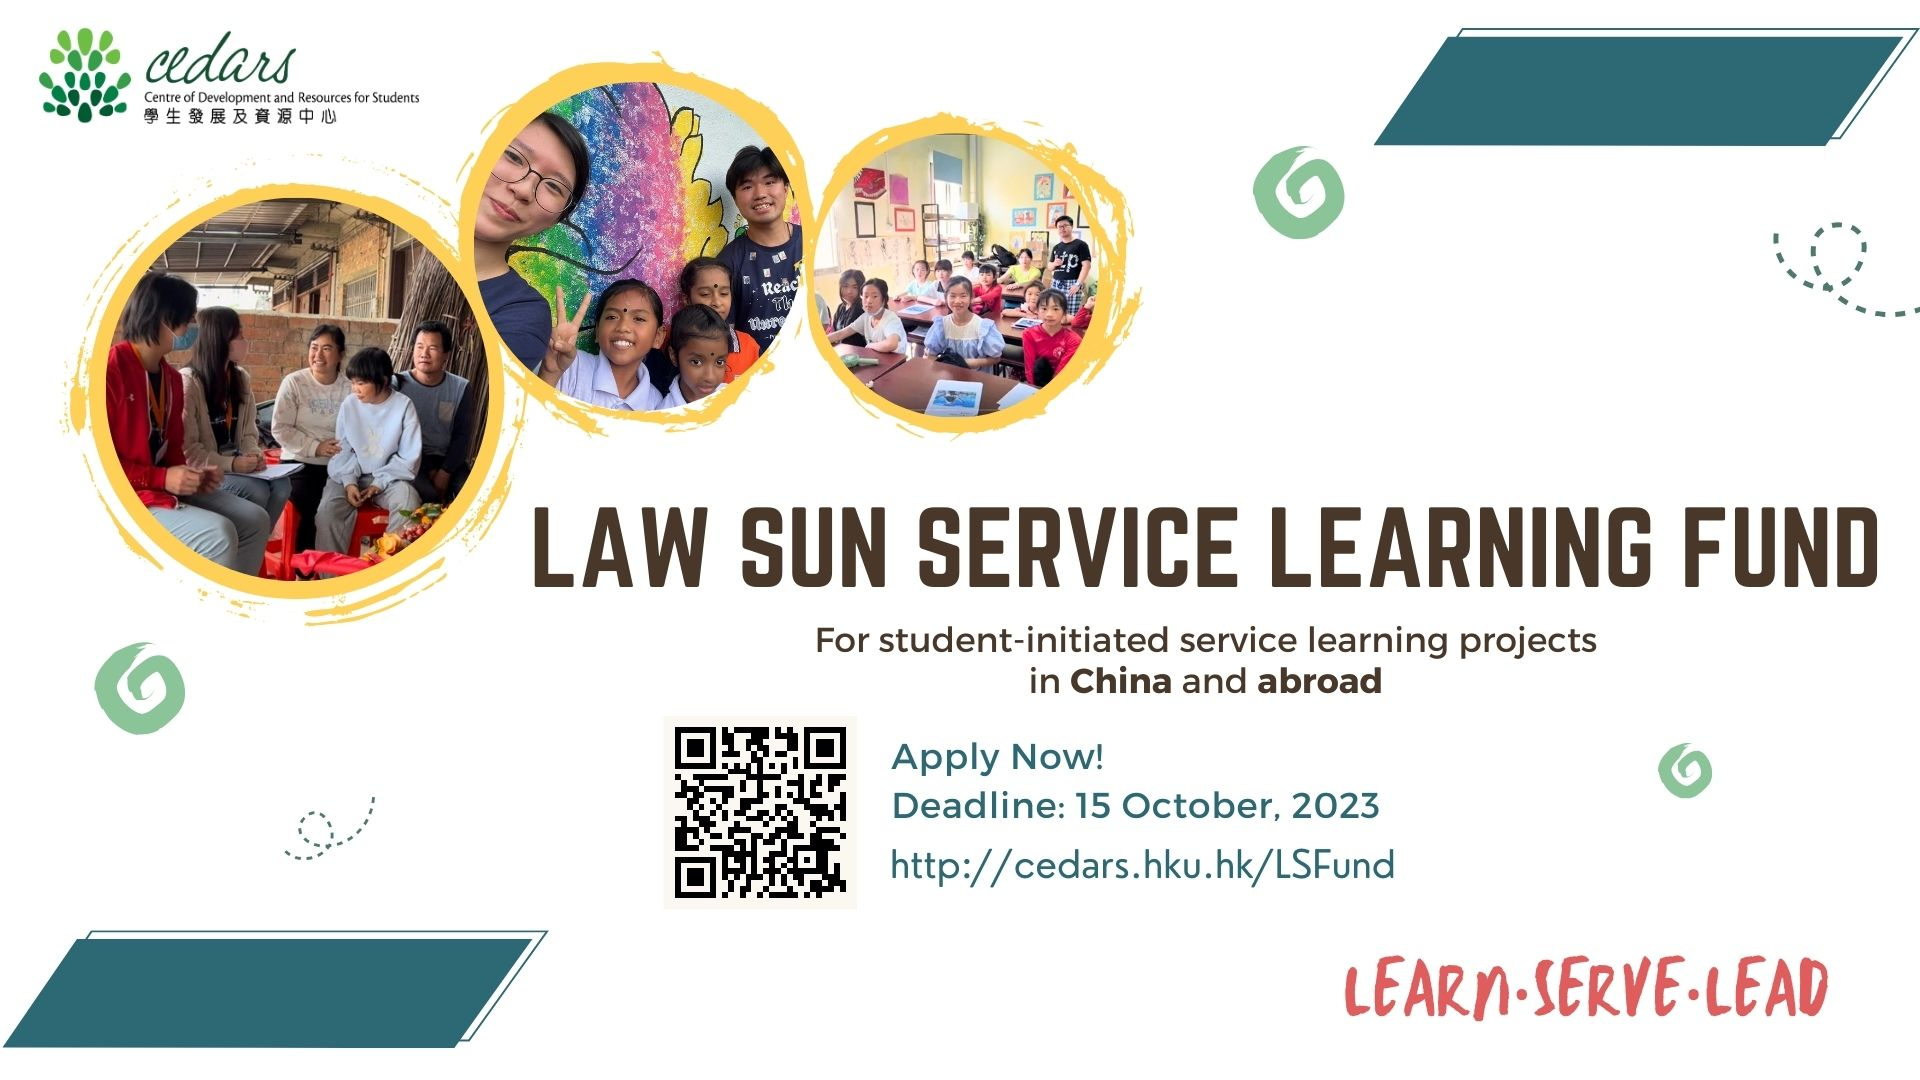 Law Sun Service Learning Fund